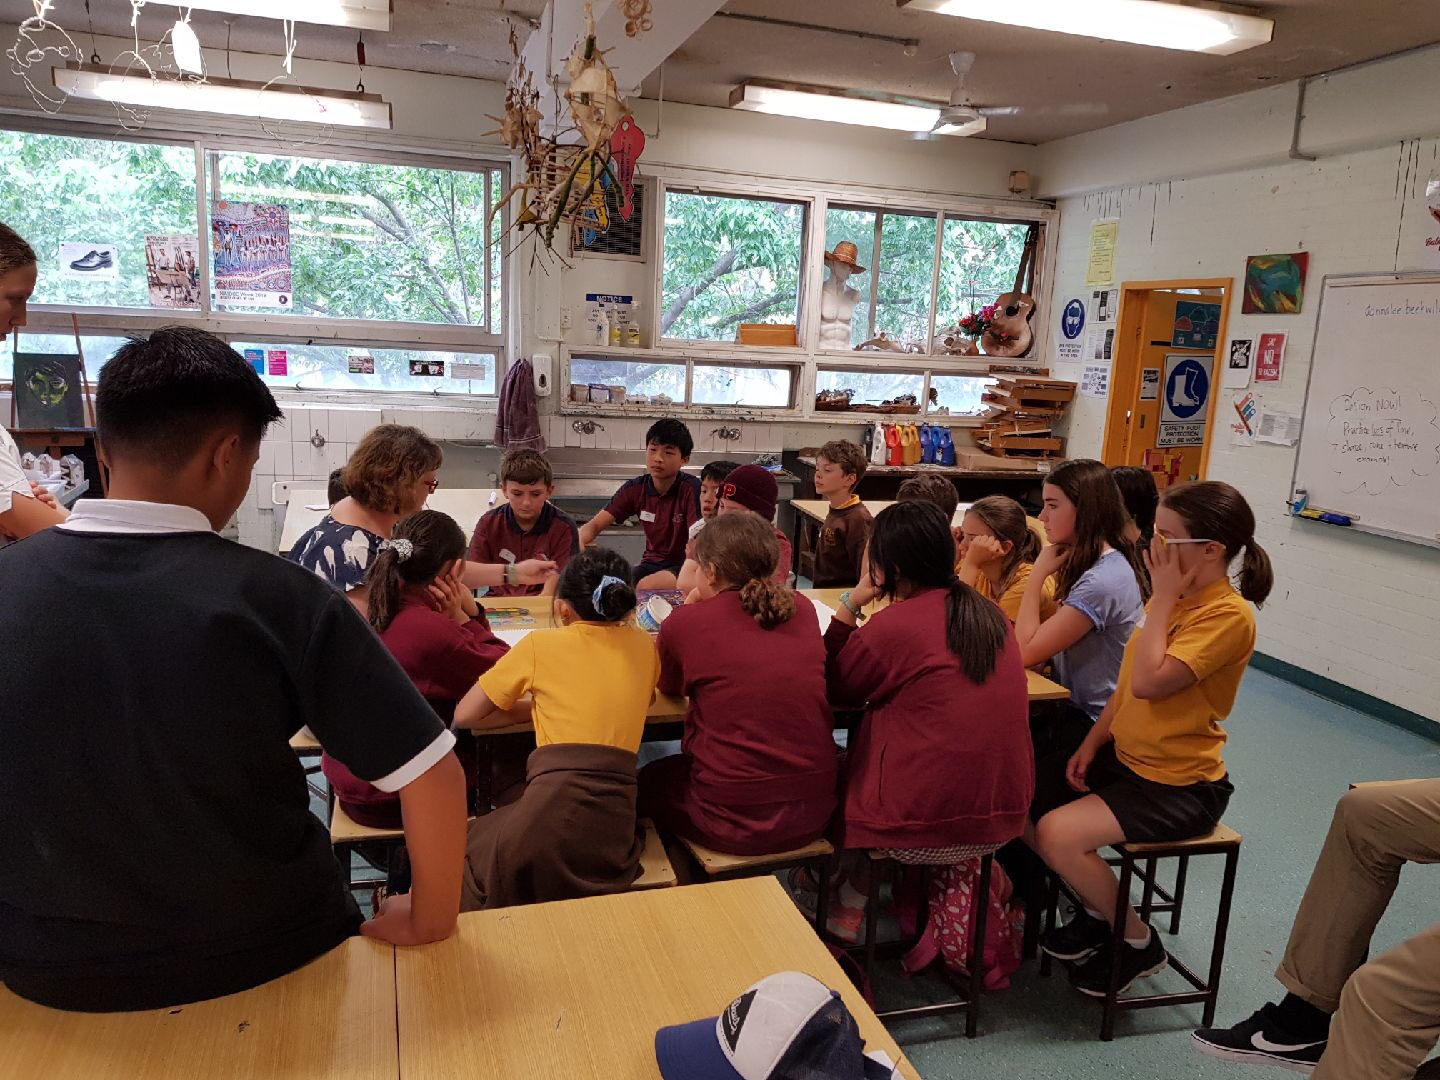 År Tilbagetrækning byld SSC_Balmain on Twitter: "It has been a busy couple of weeks for our  Transition Team at Balmain Campus. Several “Day At High School” events last  week followed by Orientation Day and 6-7